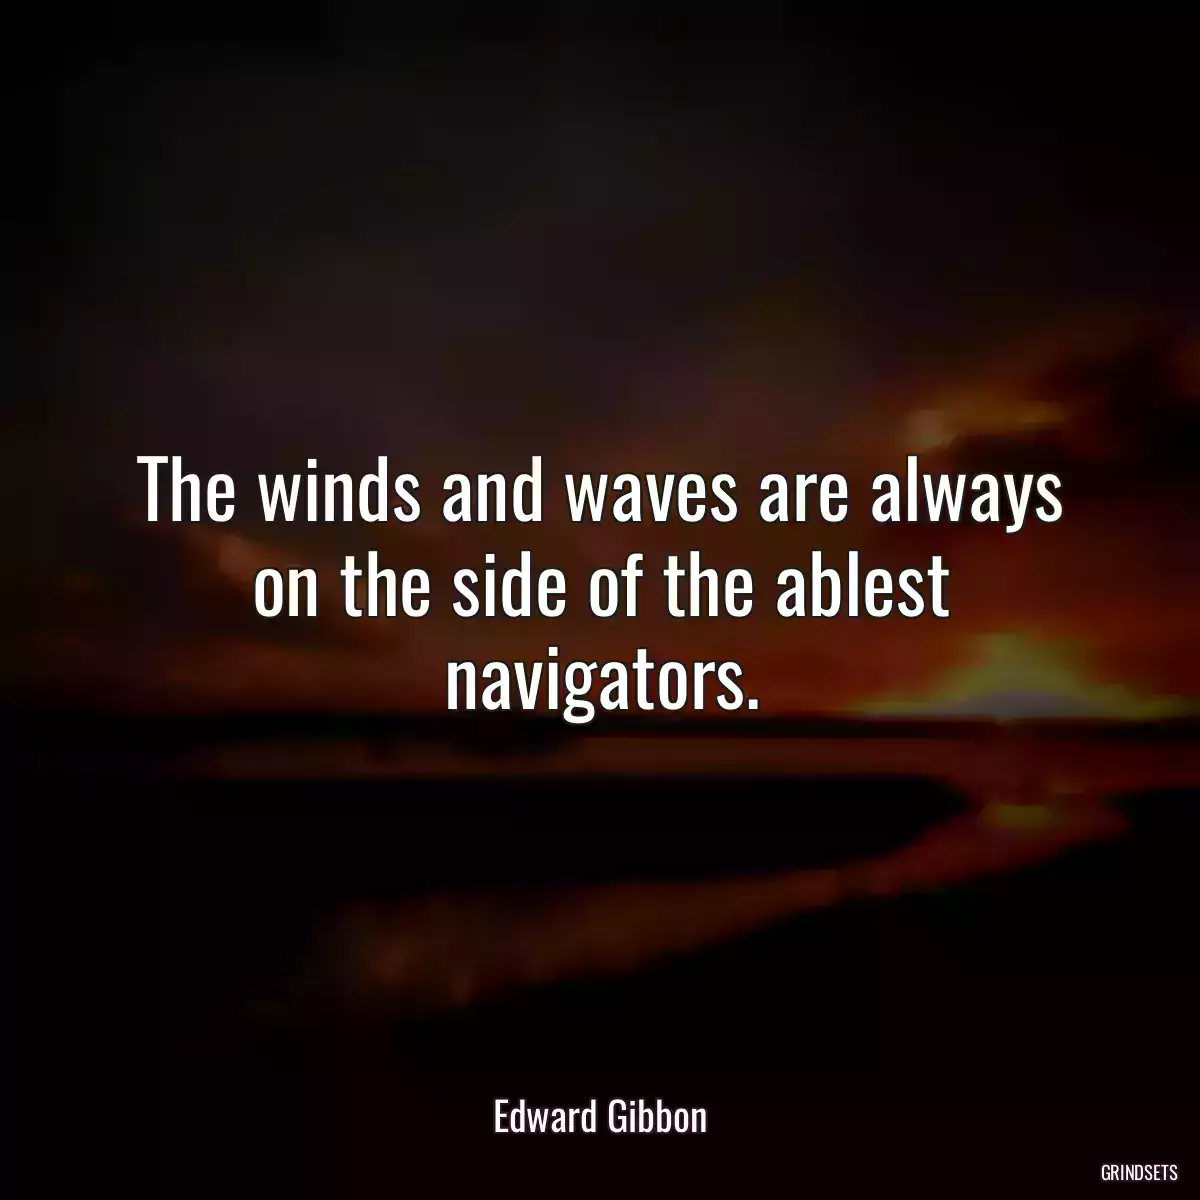 The winds and waves are always on the side of the ablest navigators.